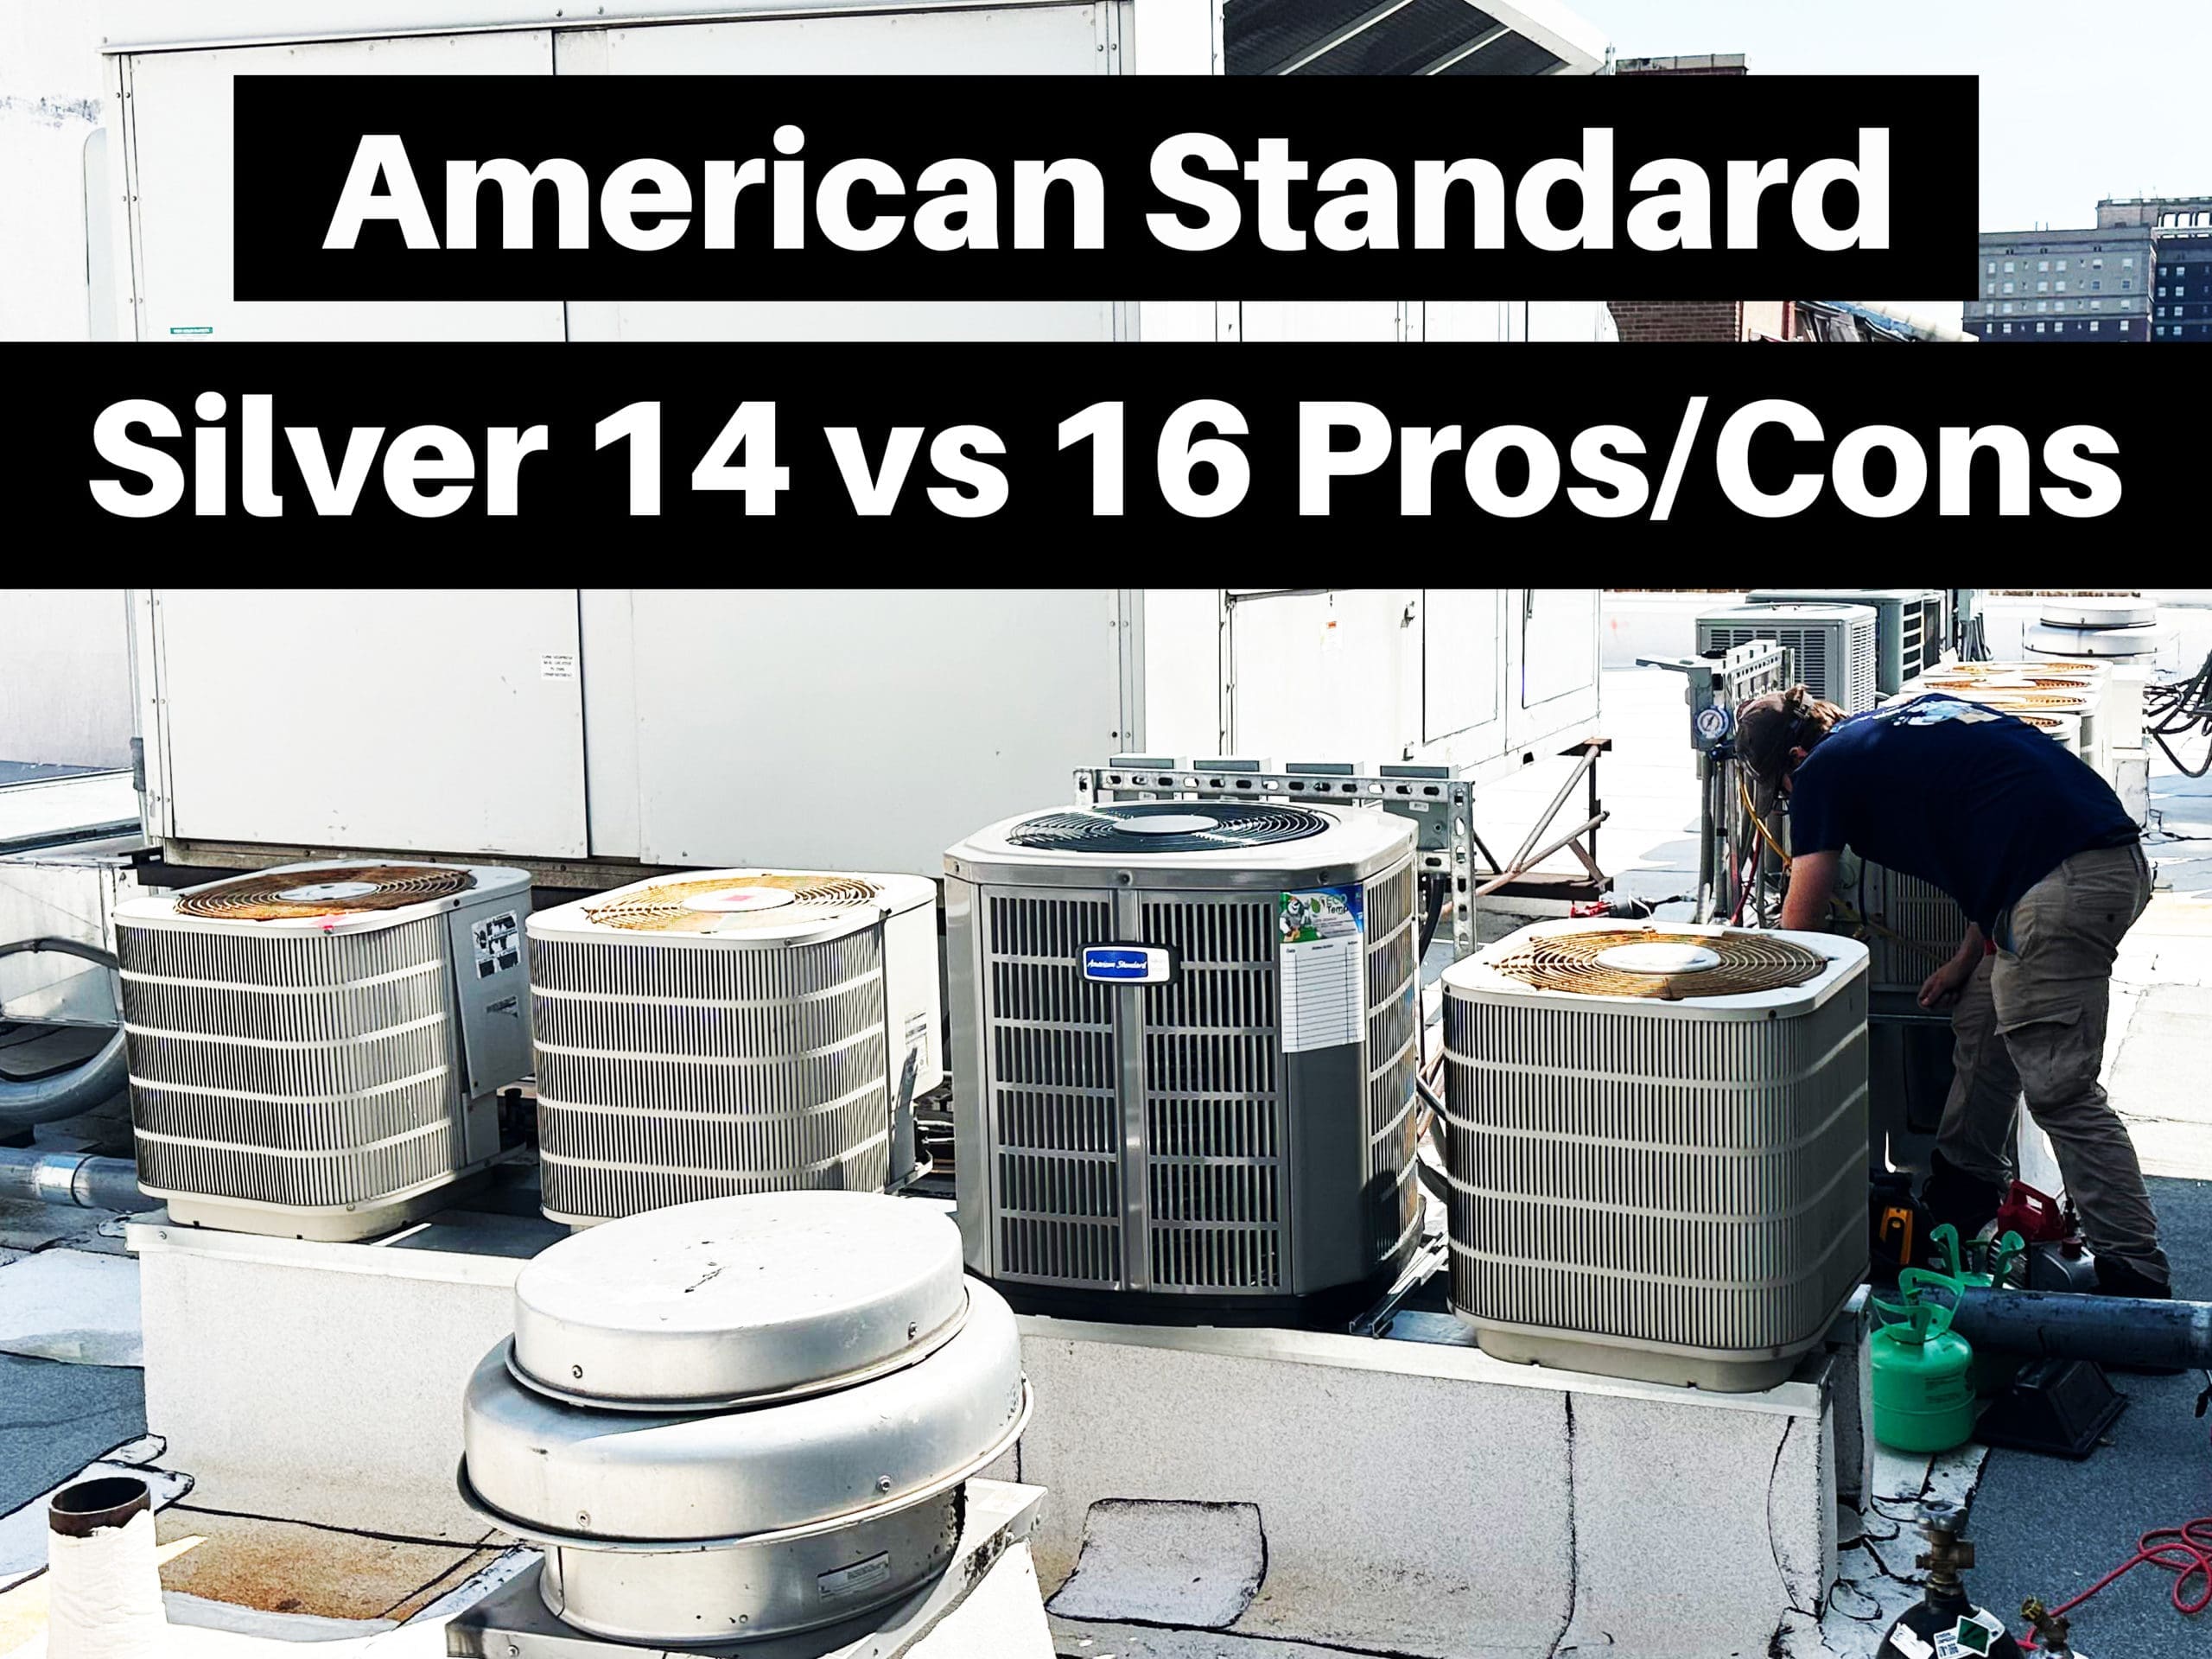 Air conditioners on a rooftop with a technician. Text saying American Standard Silver 14 vs 16 pros and cons.